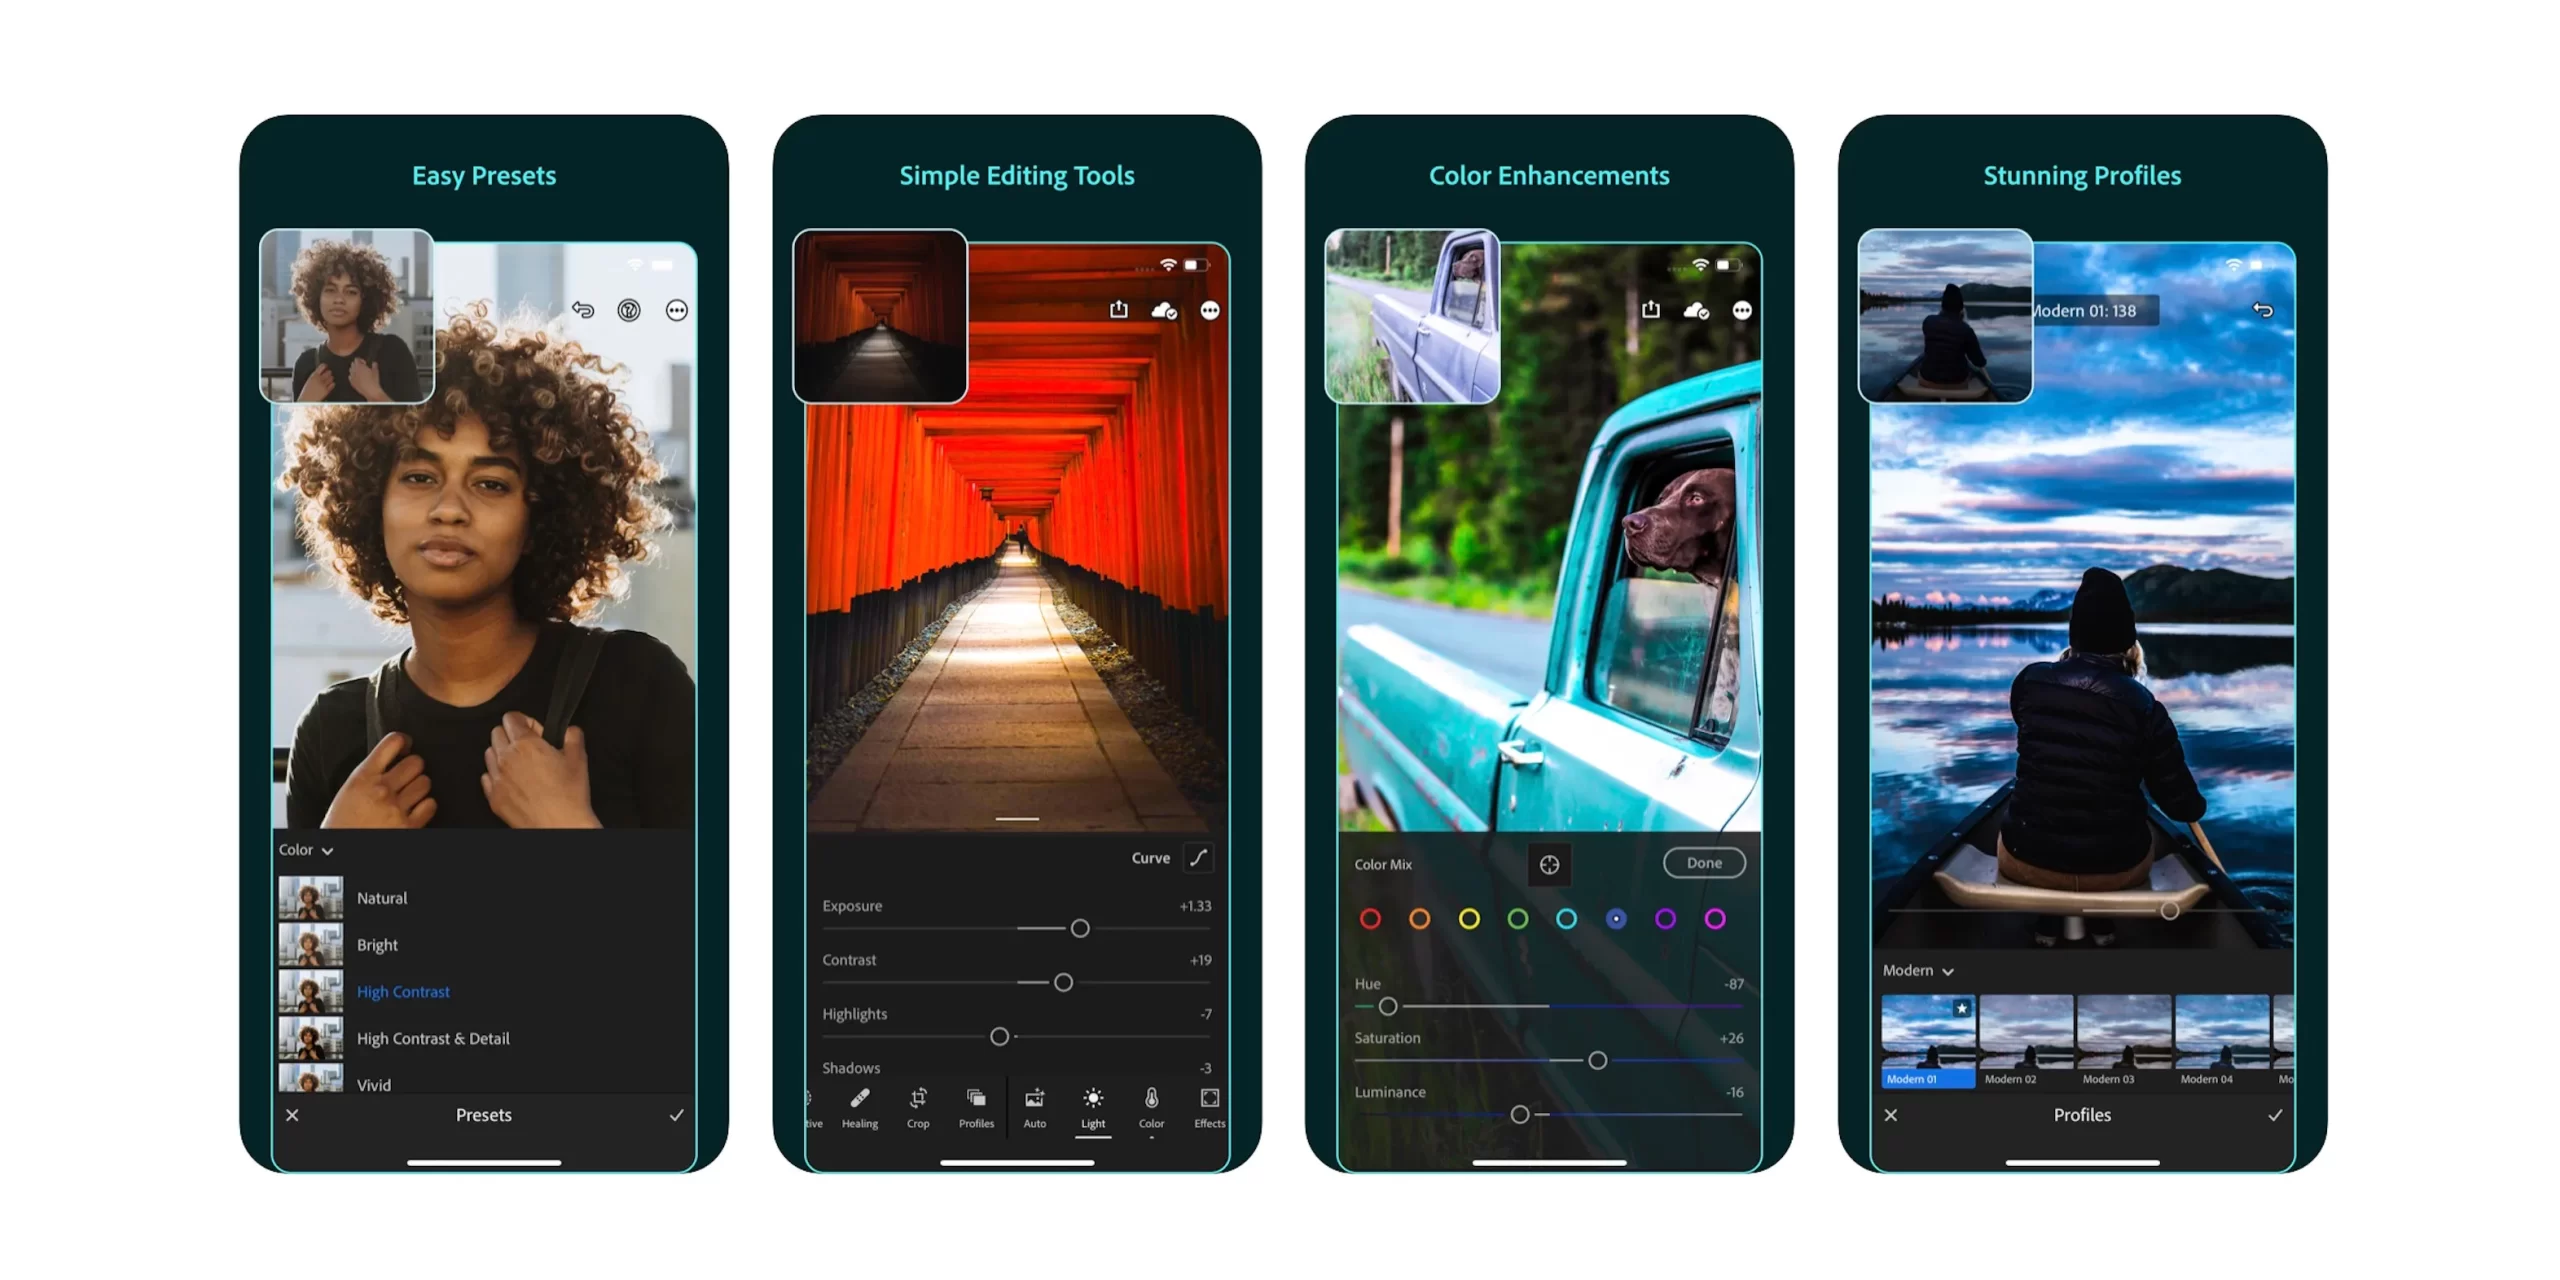 Boost Your Smartphone Photography With These Top Photography Apps 12